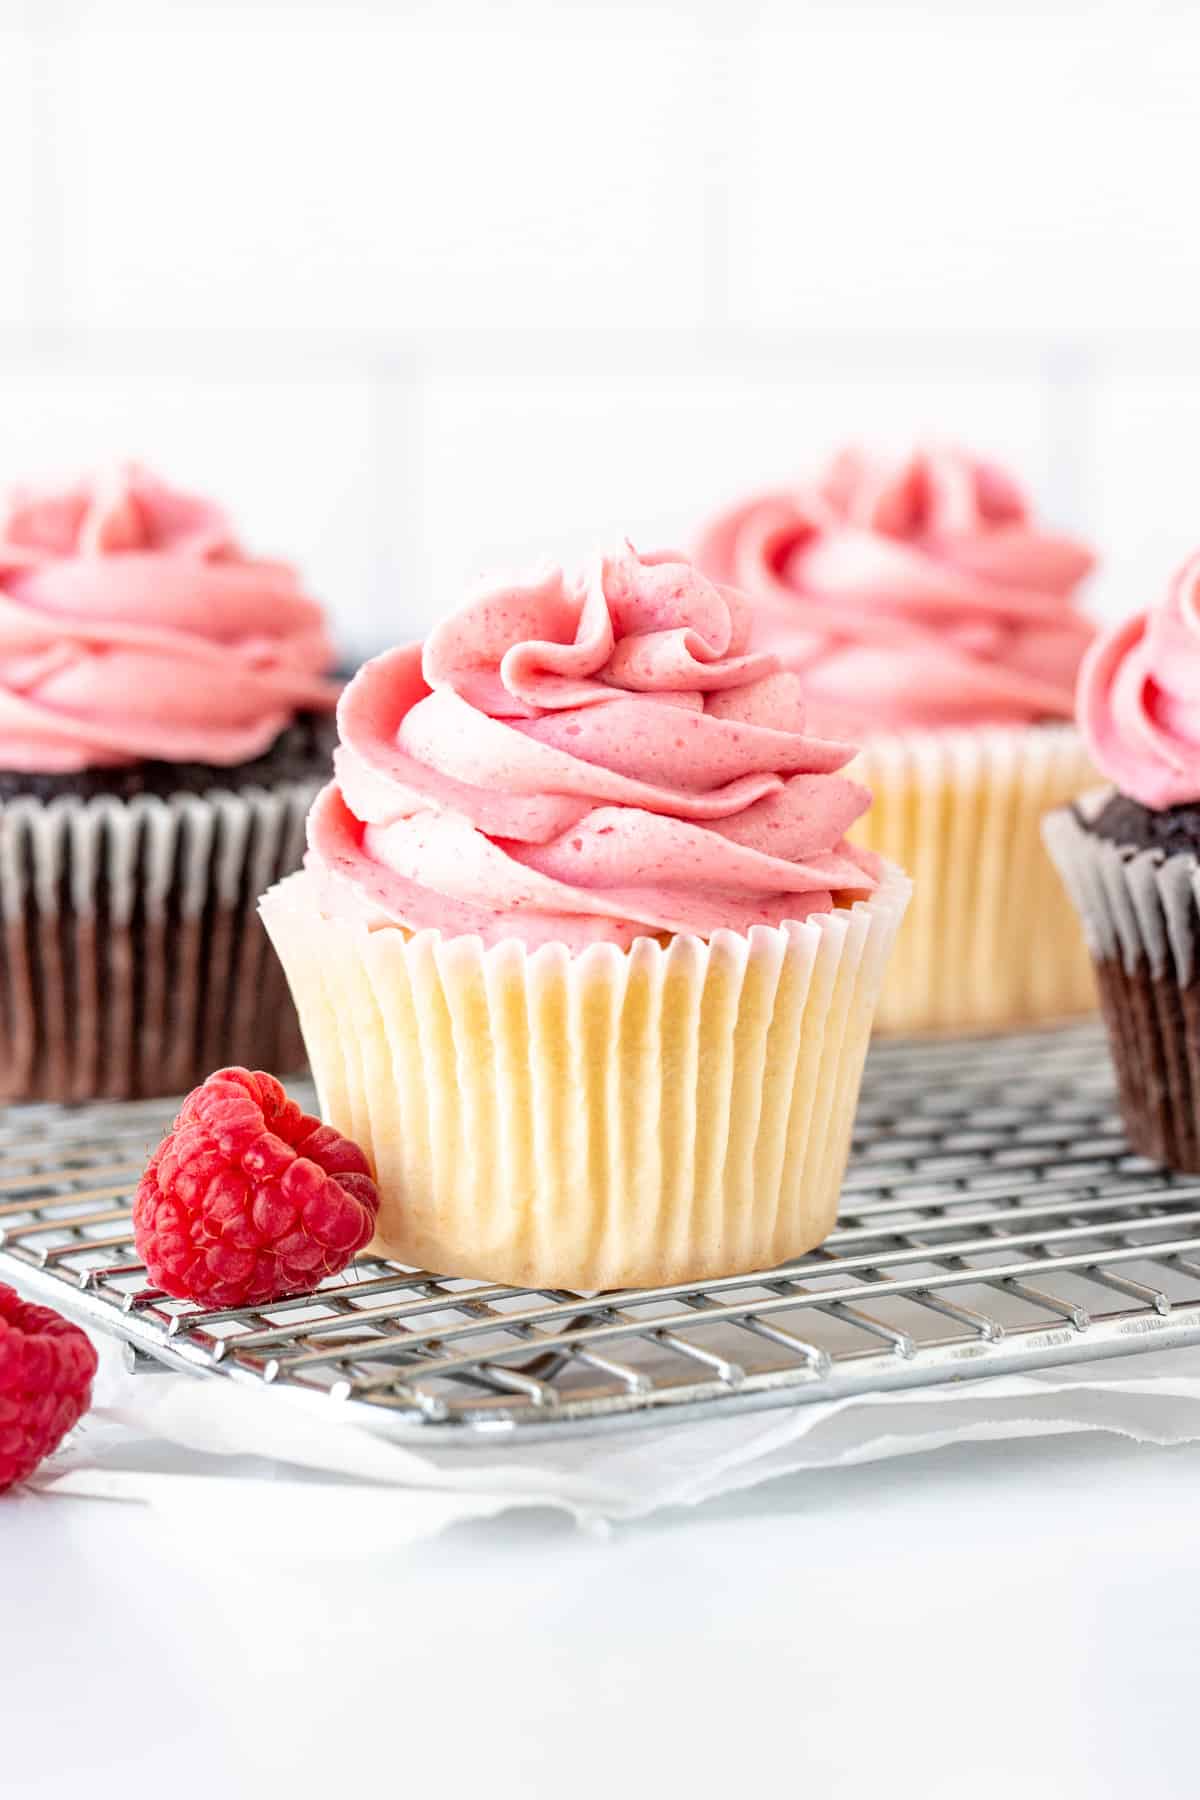 Vanilla and chocolate cupcakes decorated with raspberry frosting made from fresh berries